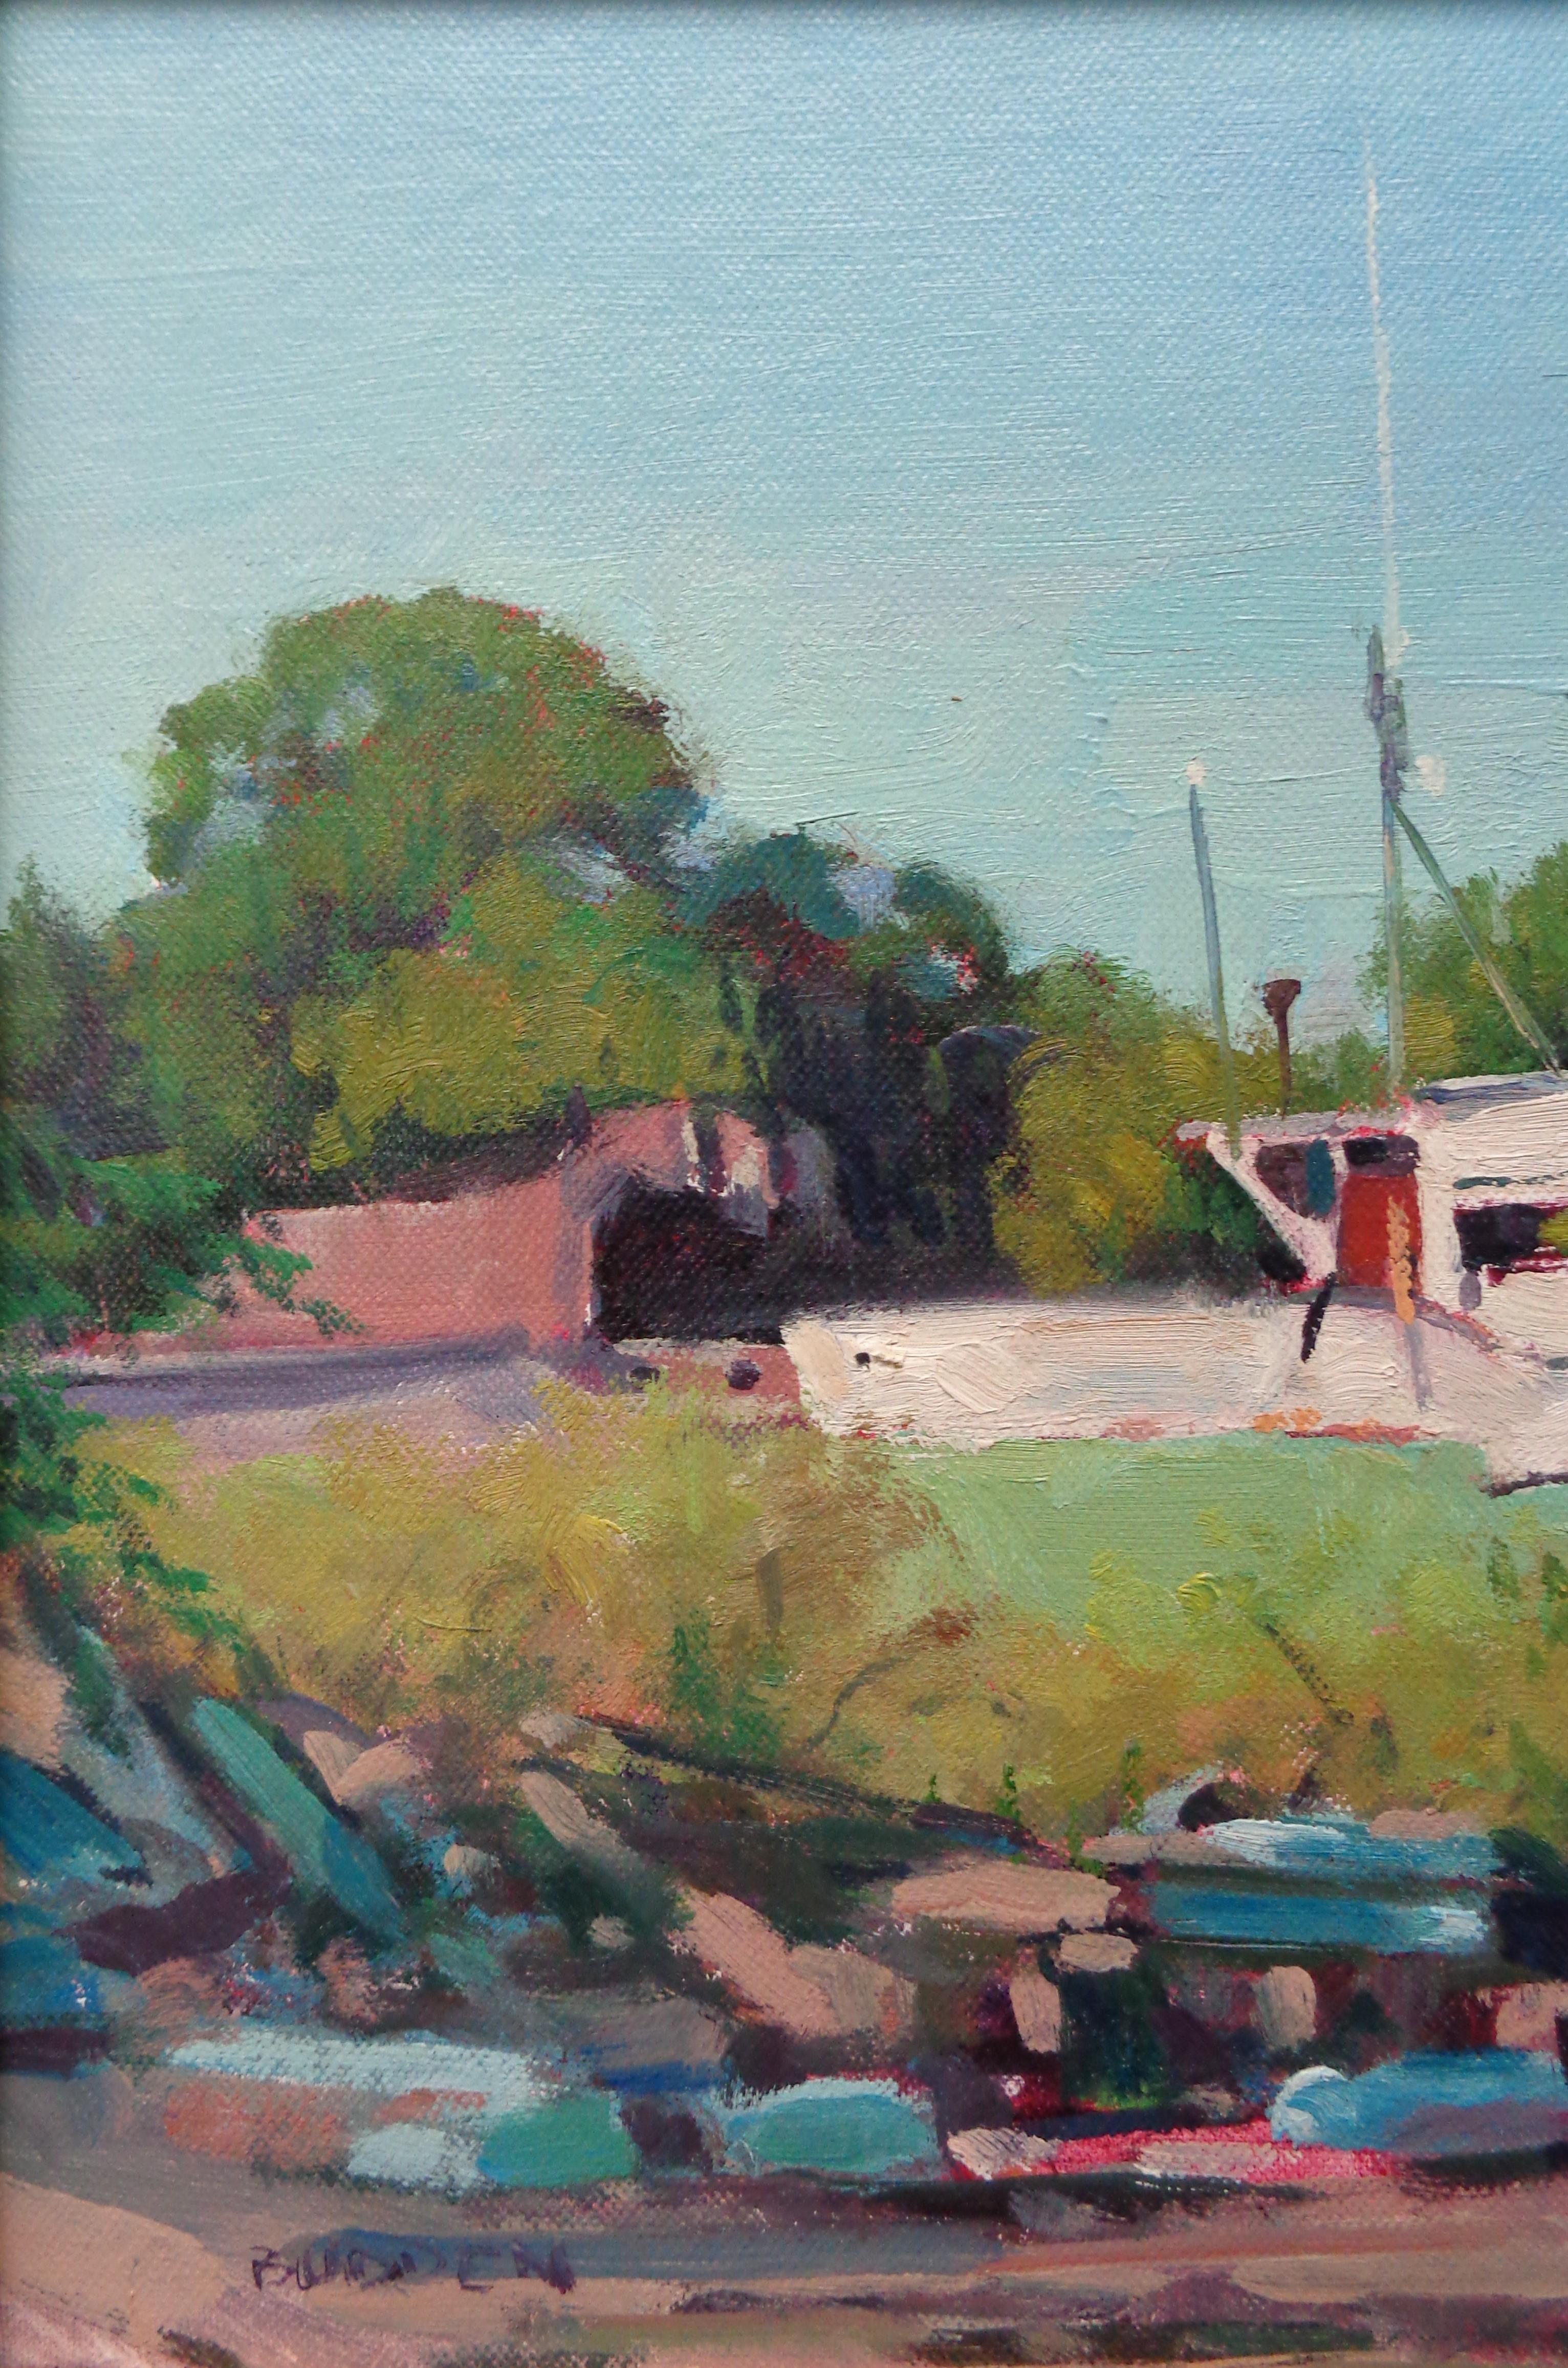 The Green Boat is an oil painting on panel by award winning contemporary artist Michael Budden that won a FIRST PLACE AWARD for me at a local plein air competition. This is one of two award winning paintings I have listed here on 1stdibs.  It